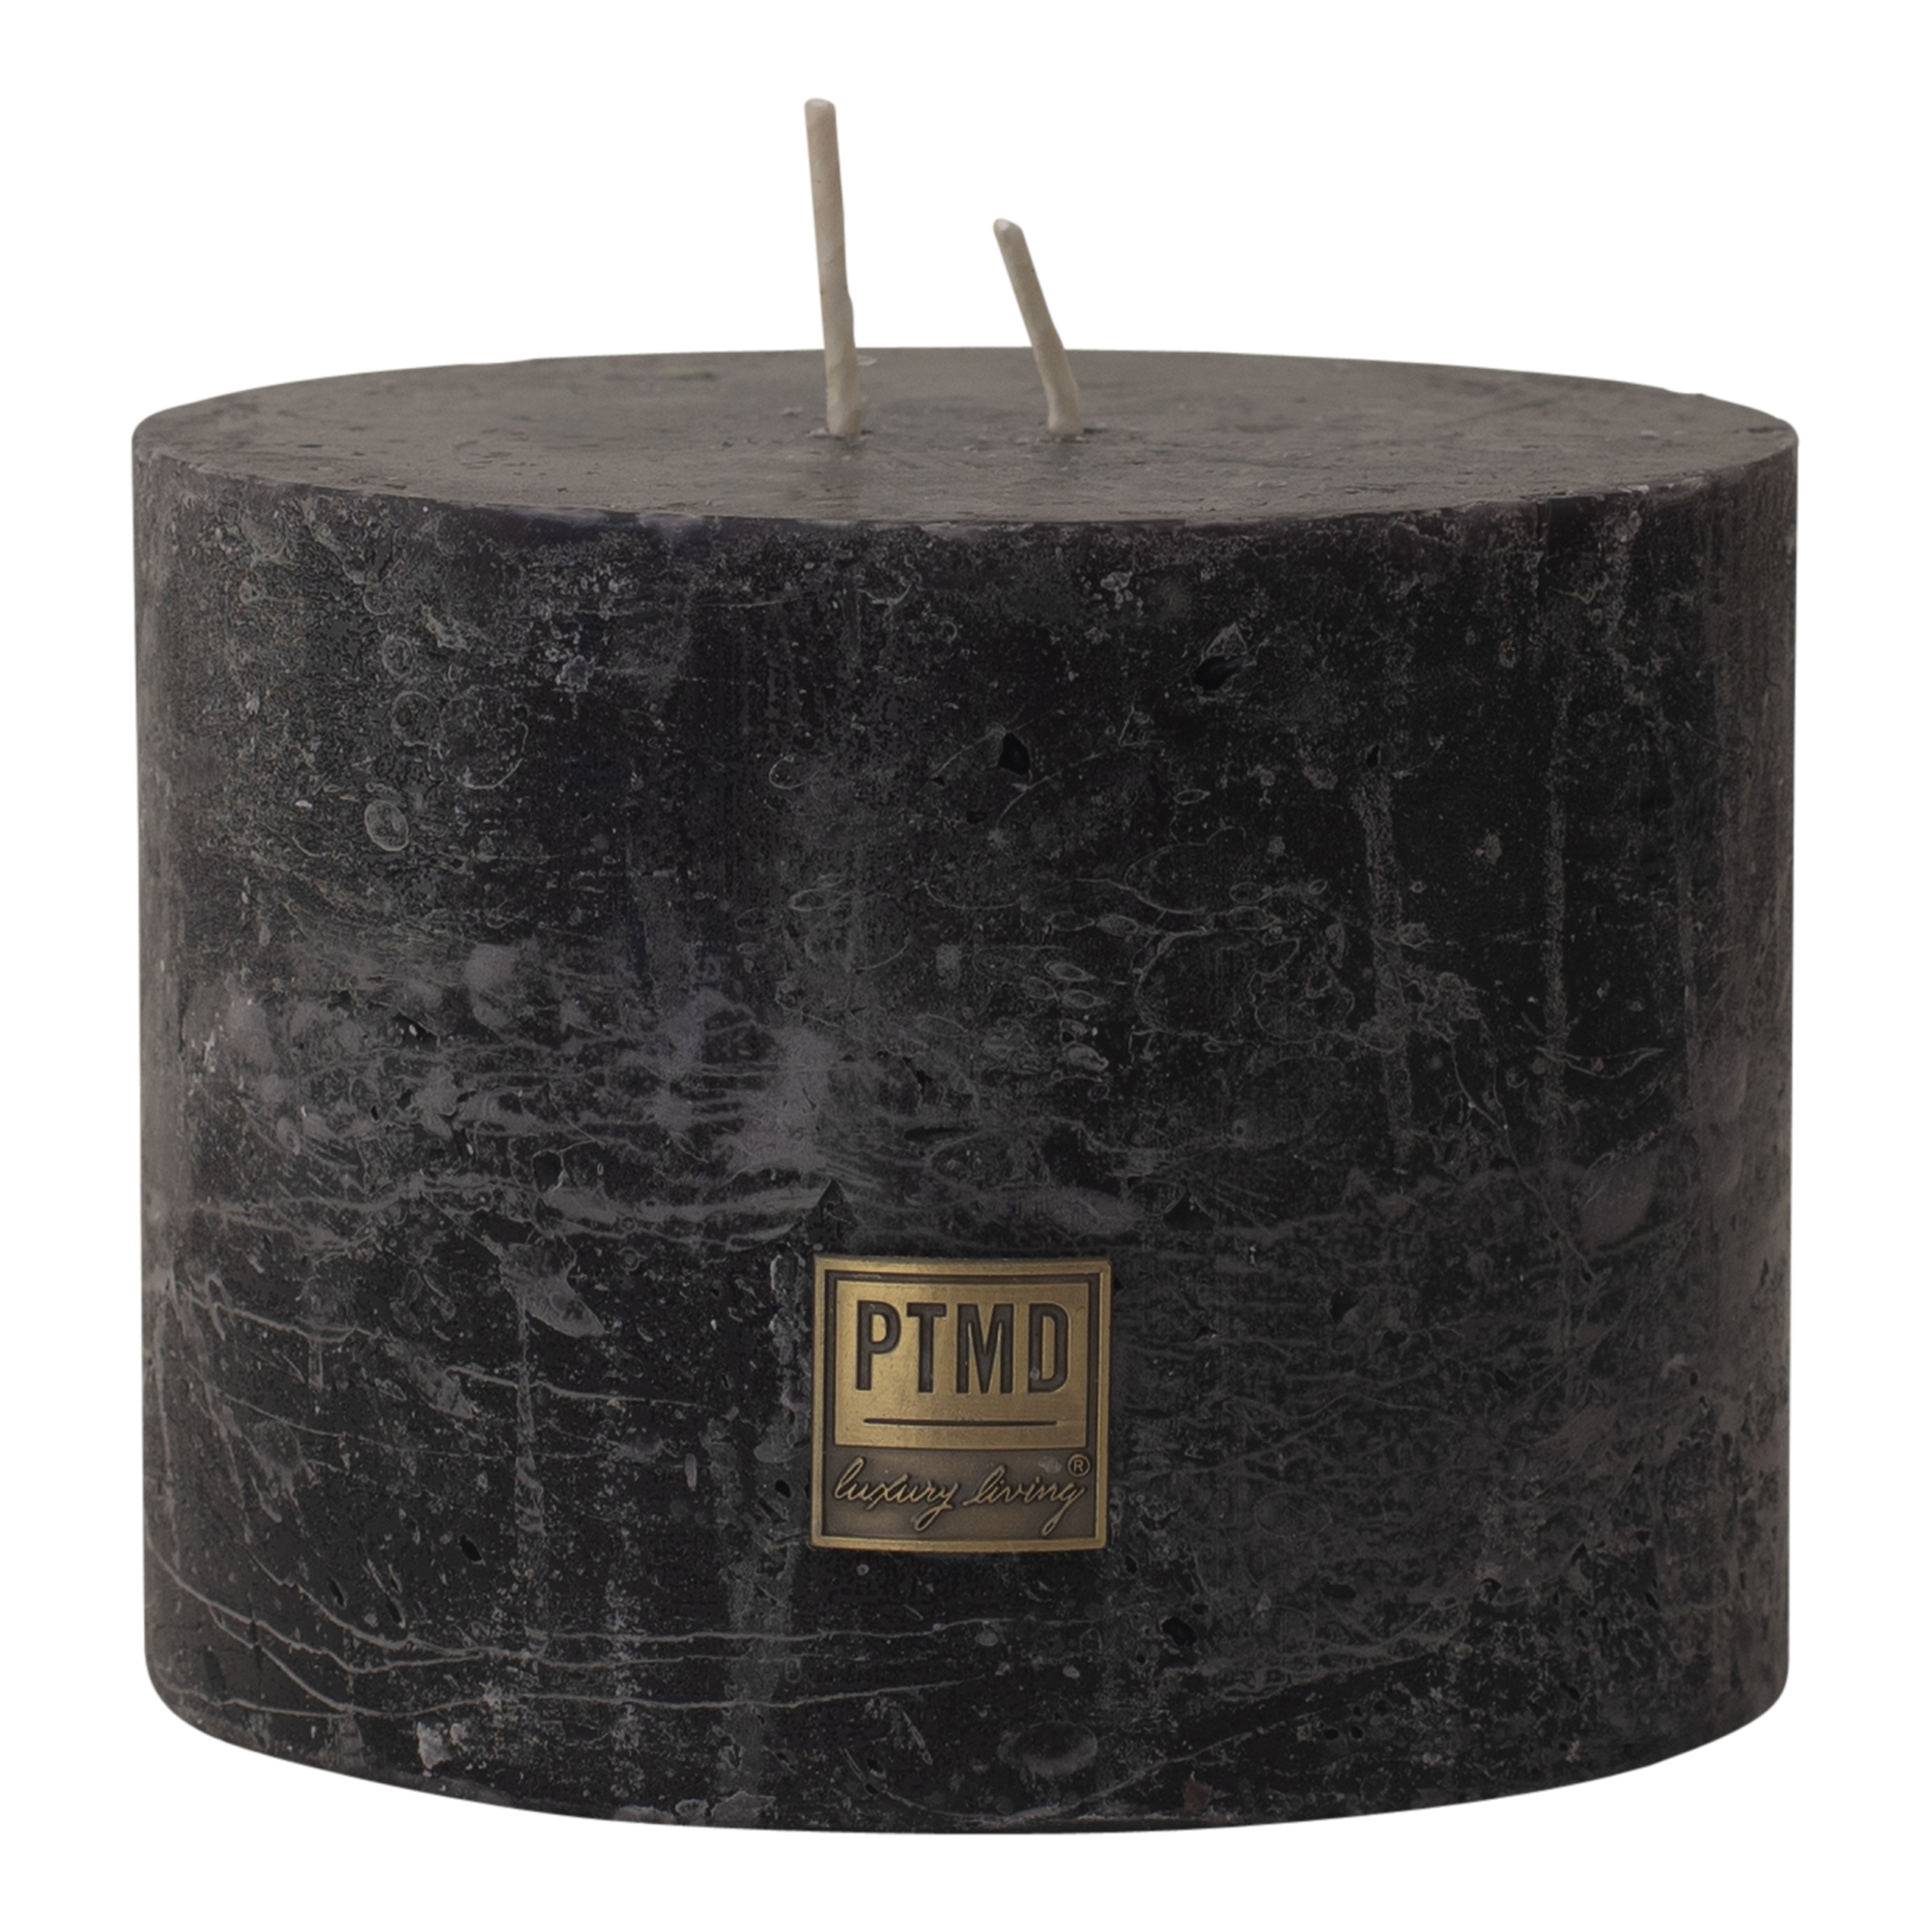 PTMD 9 x 12cm Charcoal Black Wax Rustic Block Candle